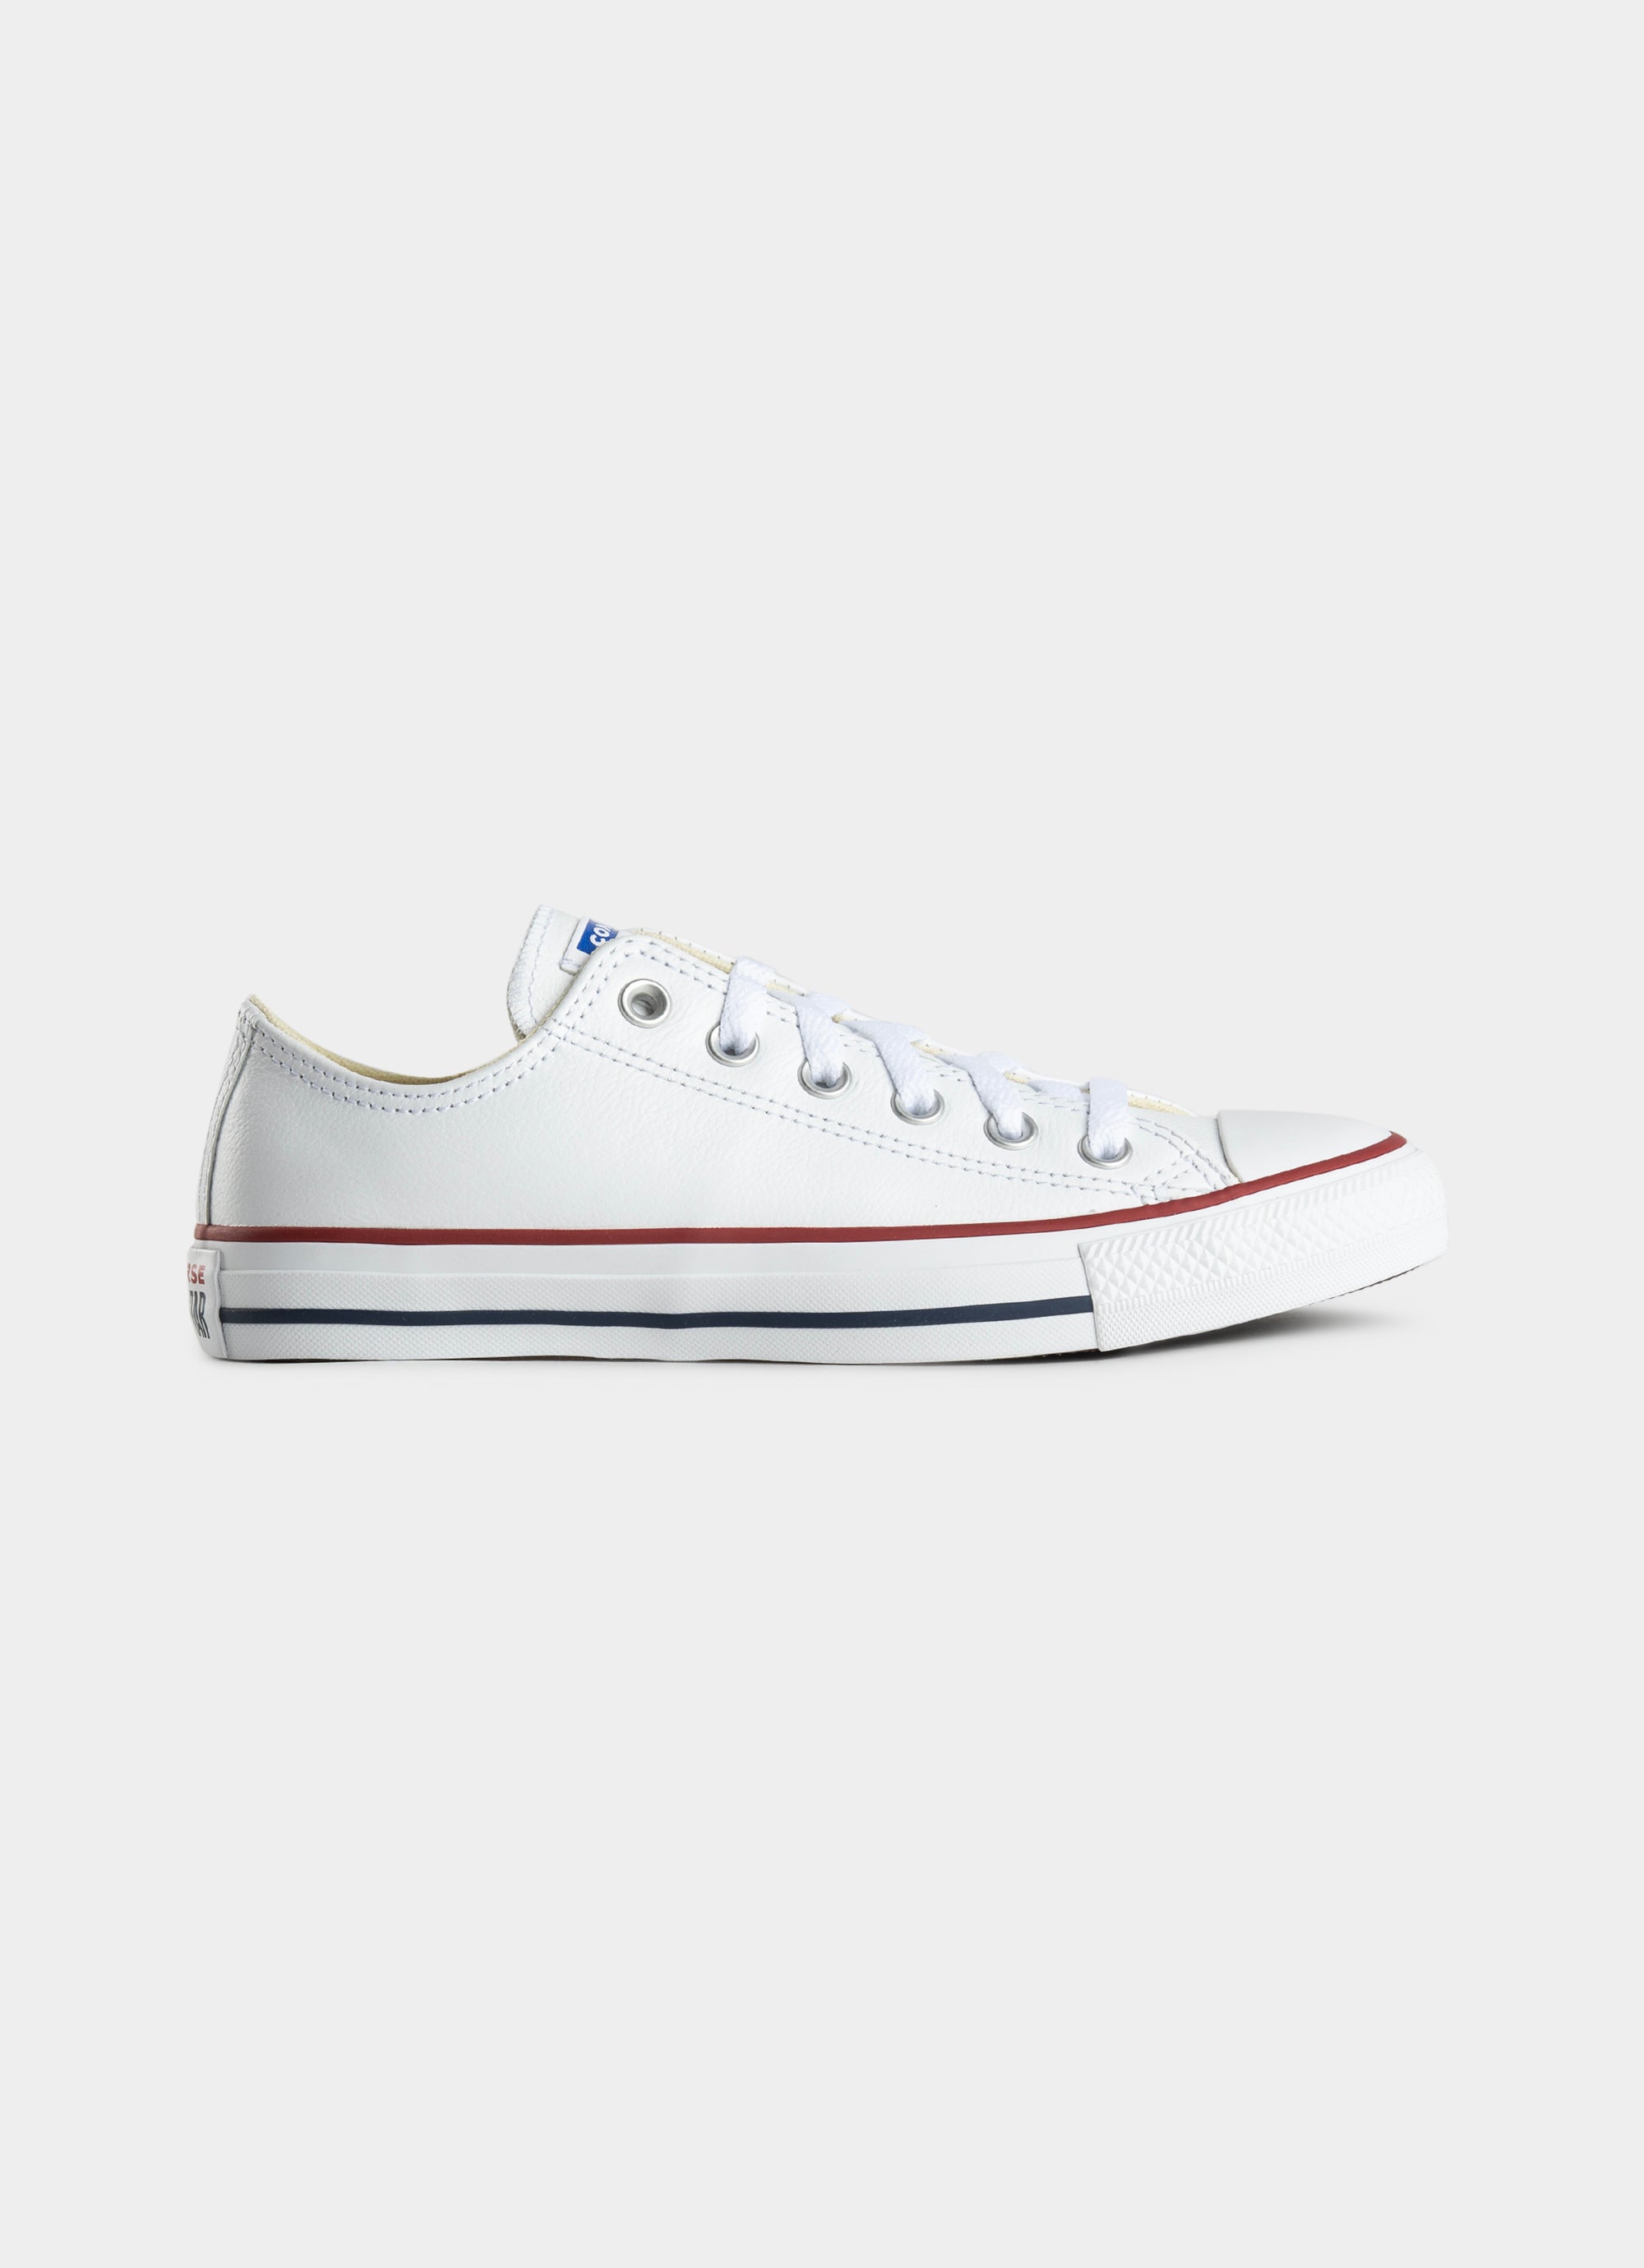 converse leather shoes low cut